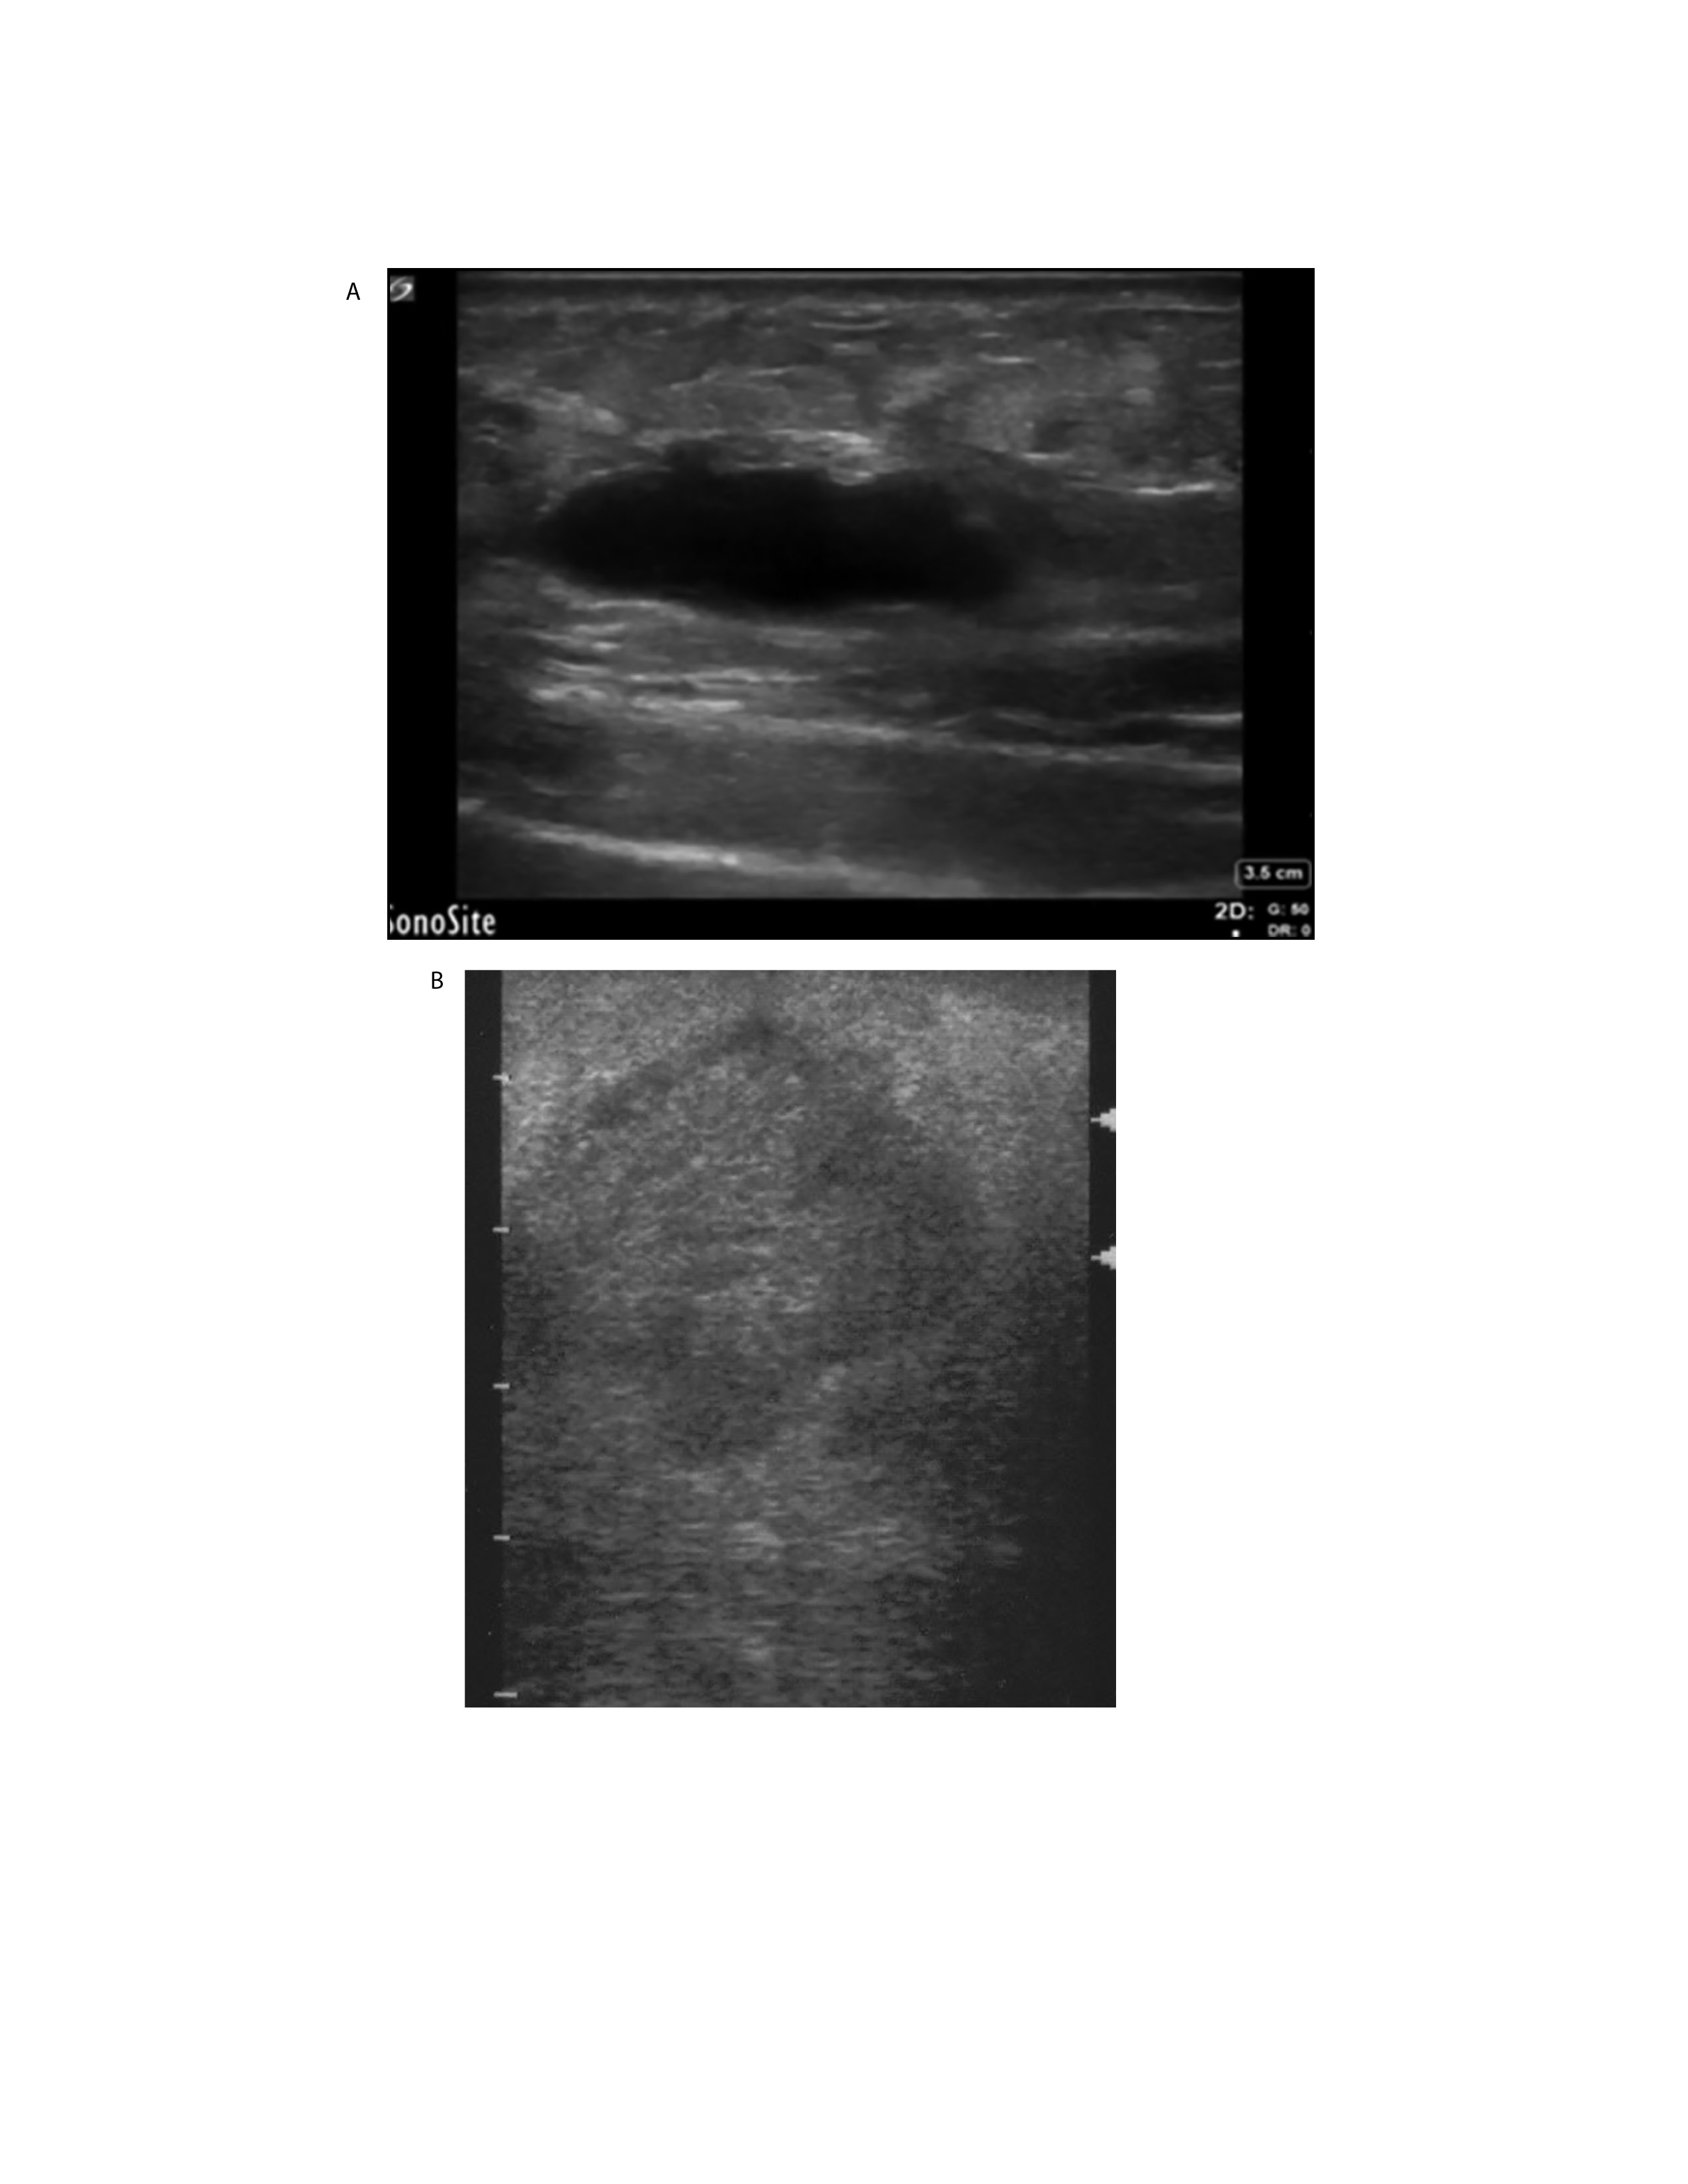 ultrasound appearance of cutaneous abscesses